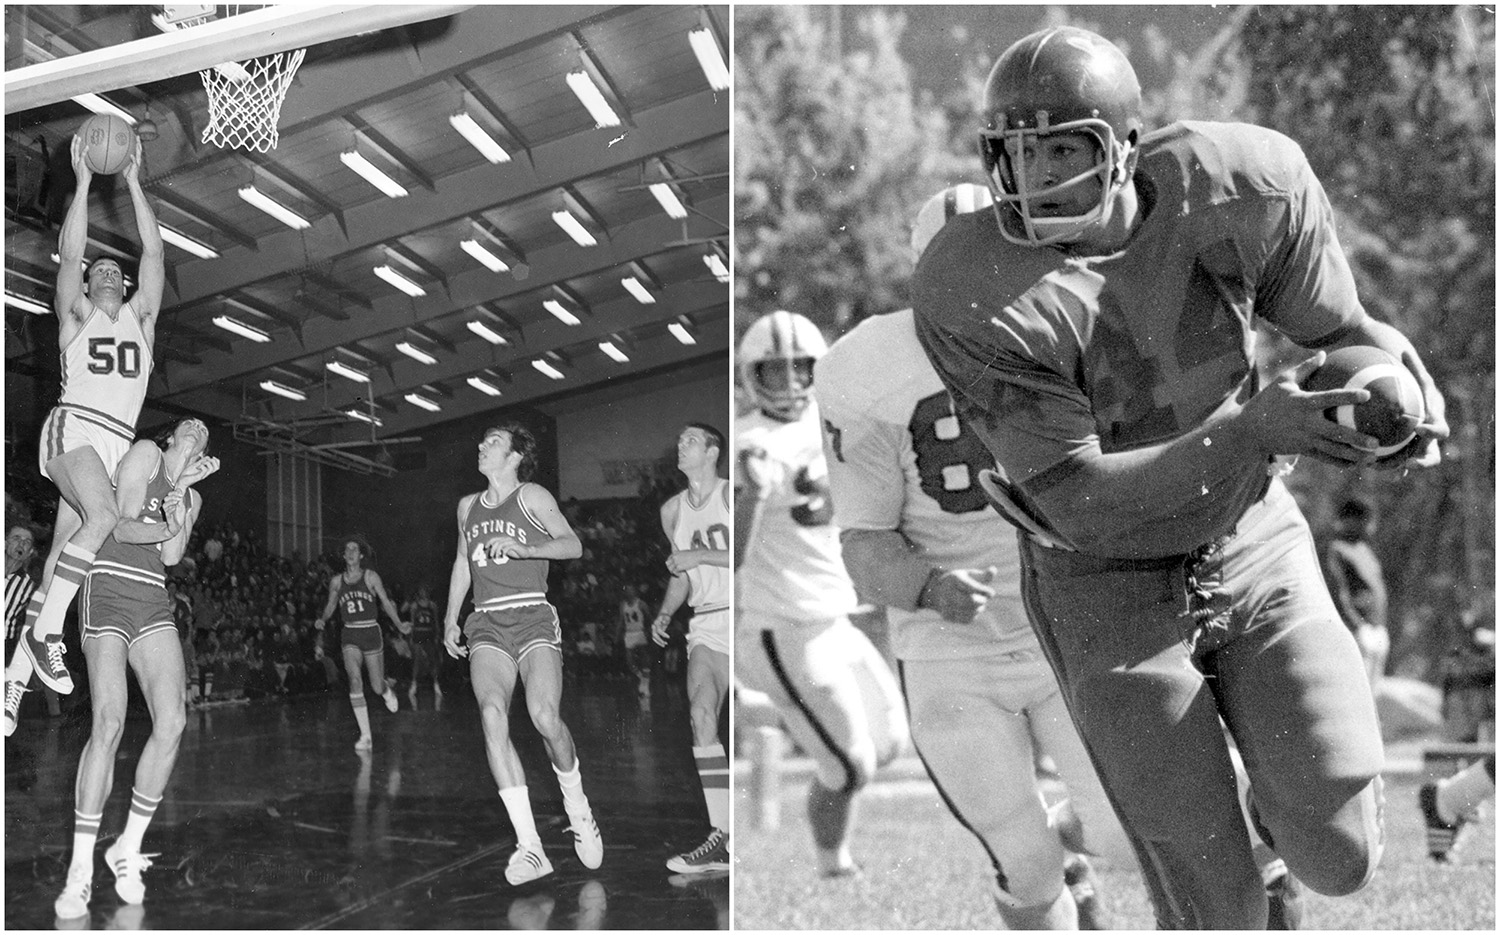 Tom Kropp played basketball and football at UNK, earning All-American honors in both sports.